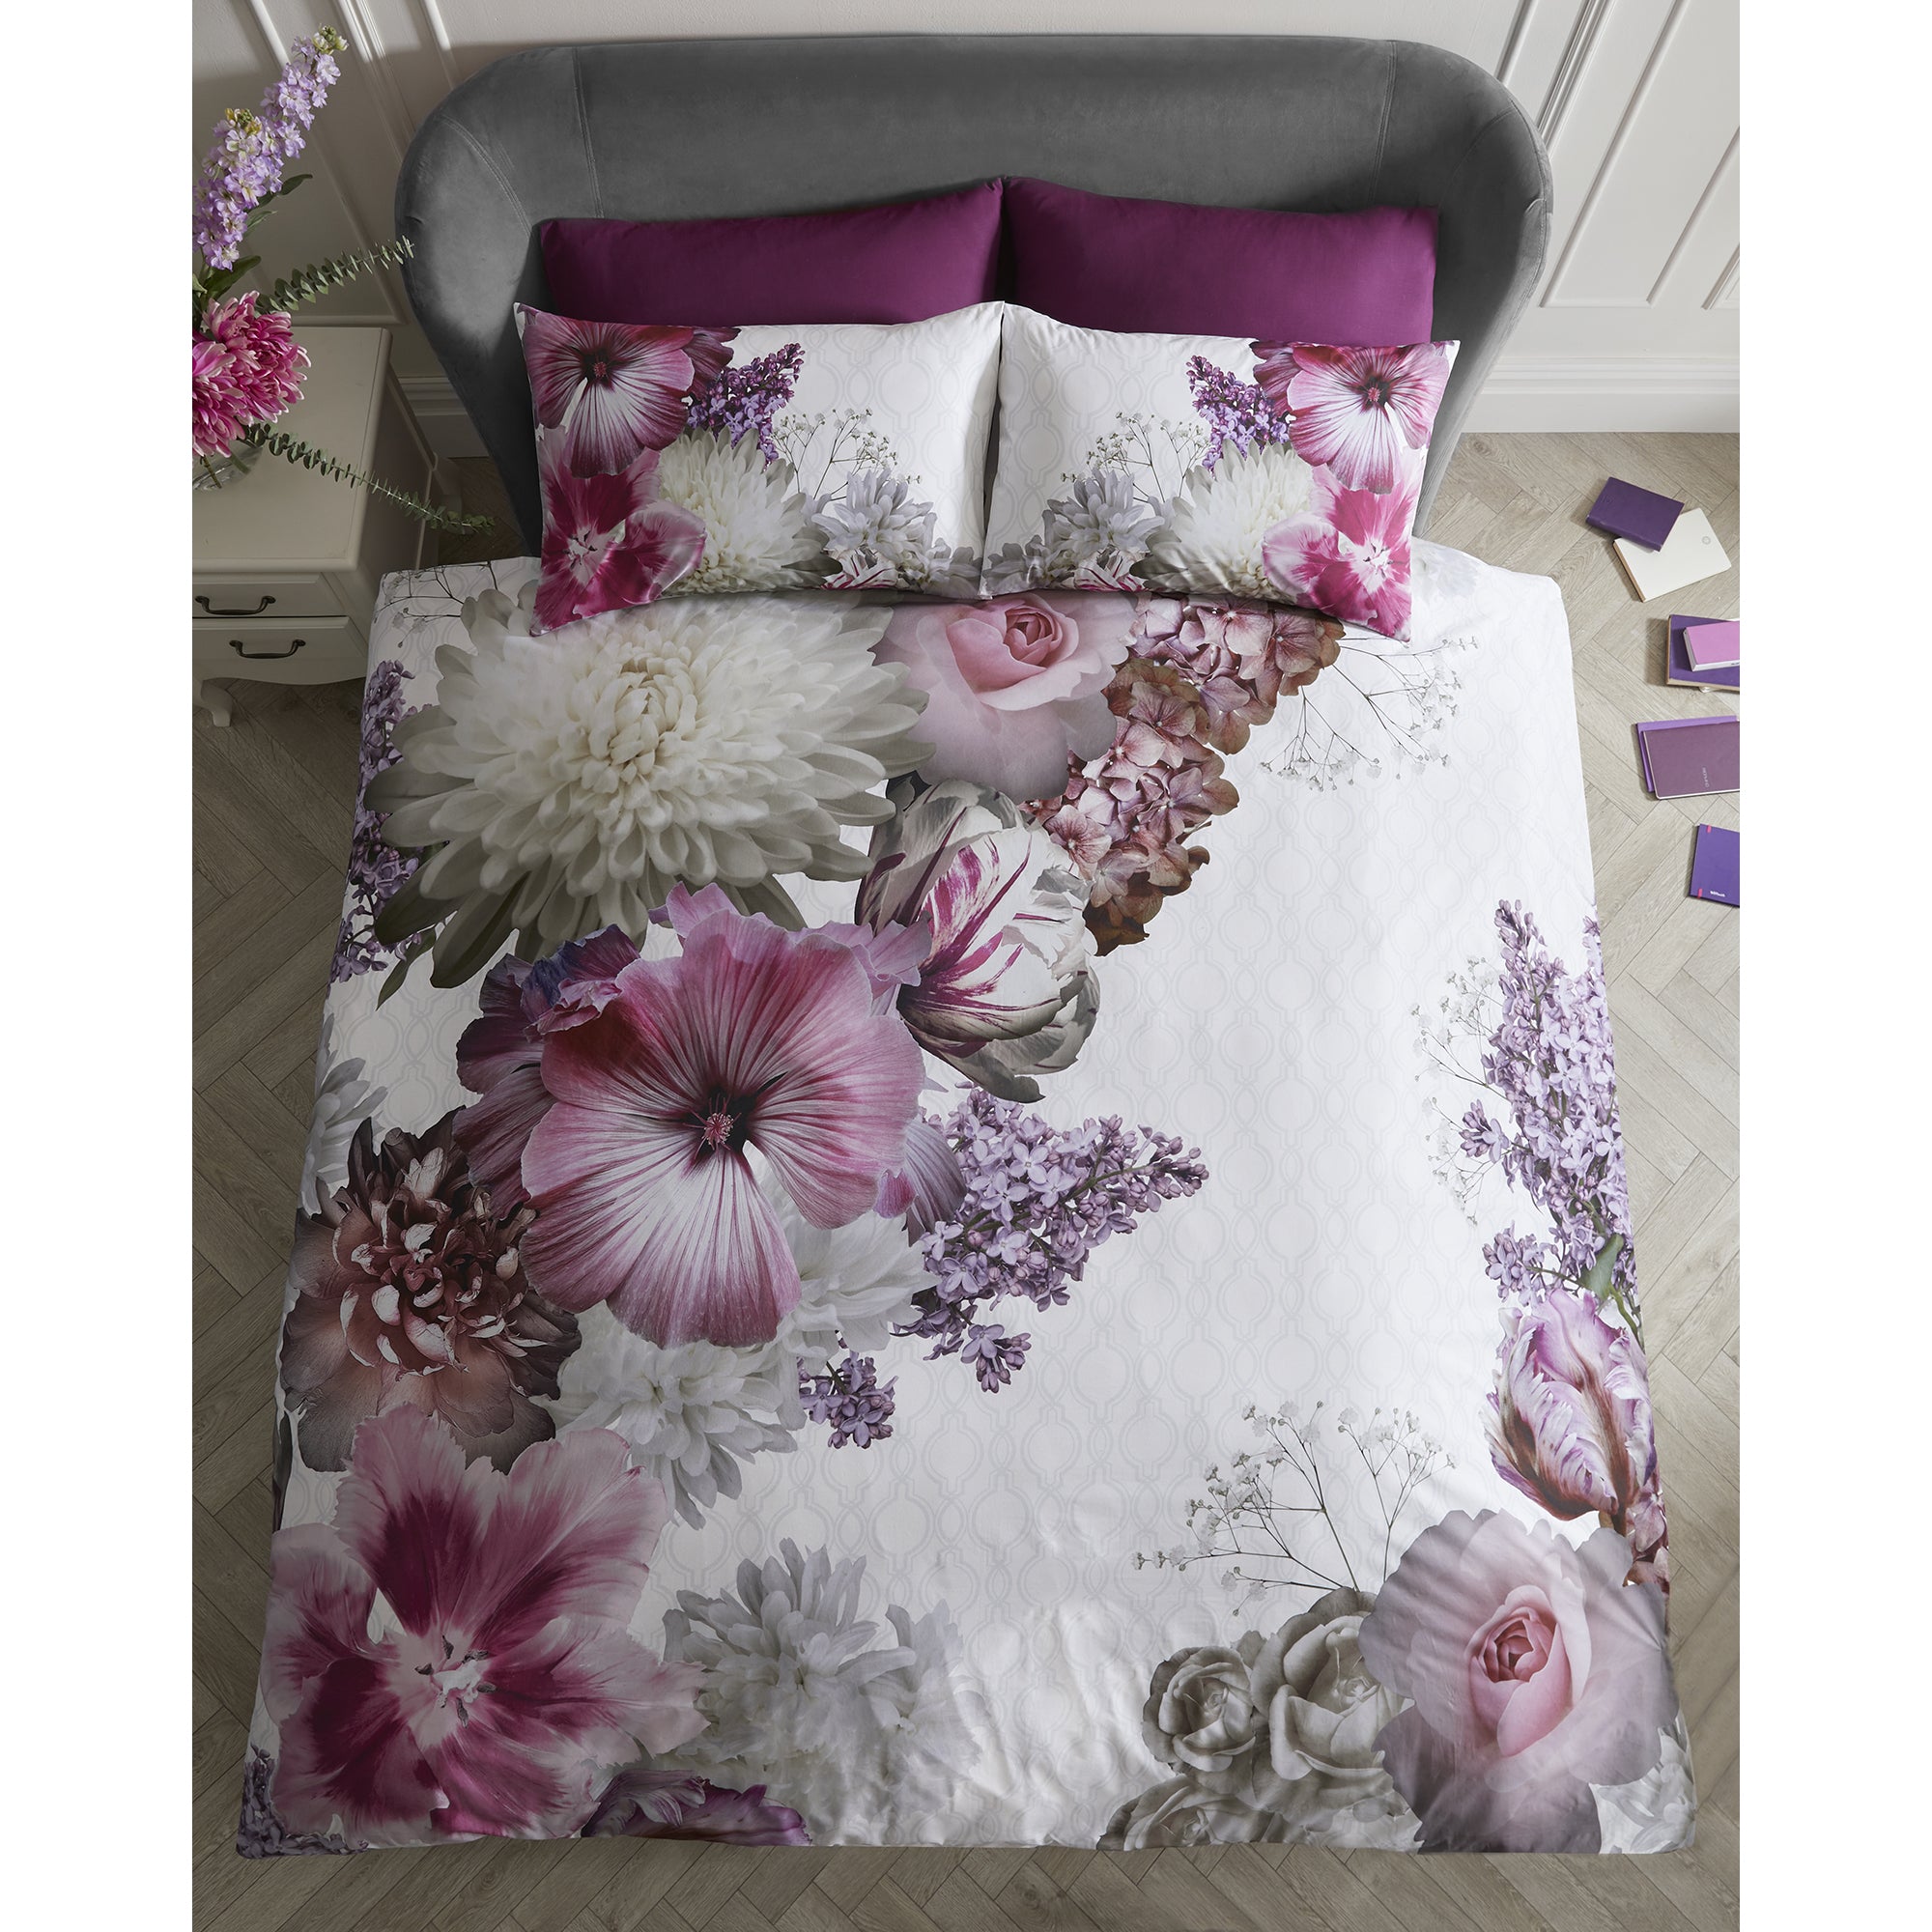 Mayfair Lady - 100% Cotton Duvet Cover Set by Laurence Llewelyn-Bowen